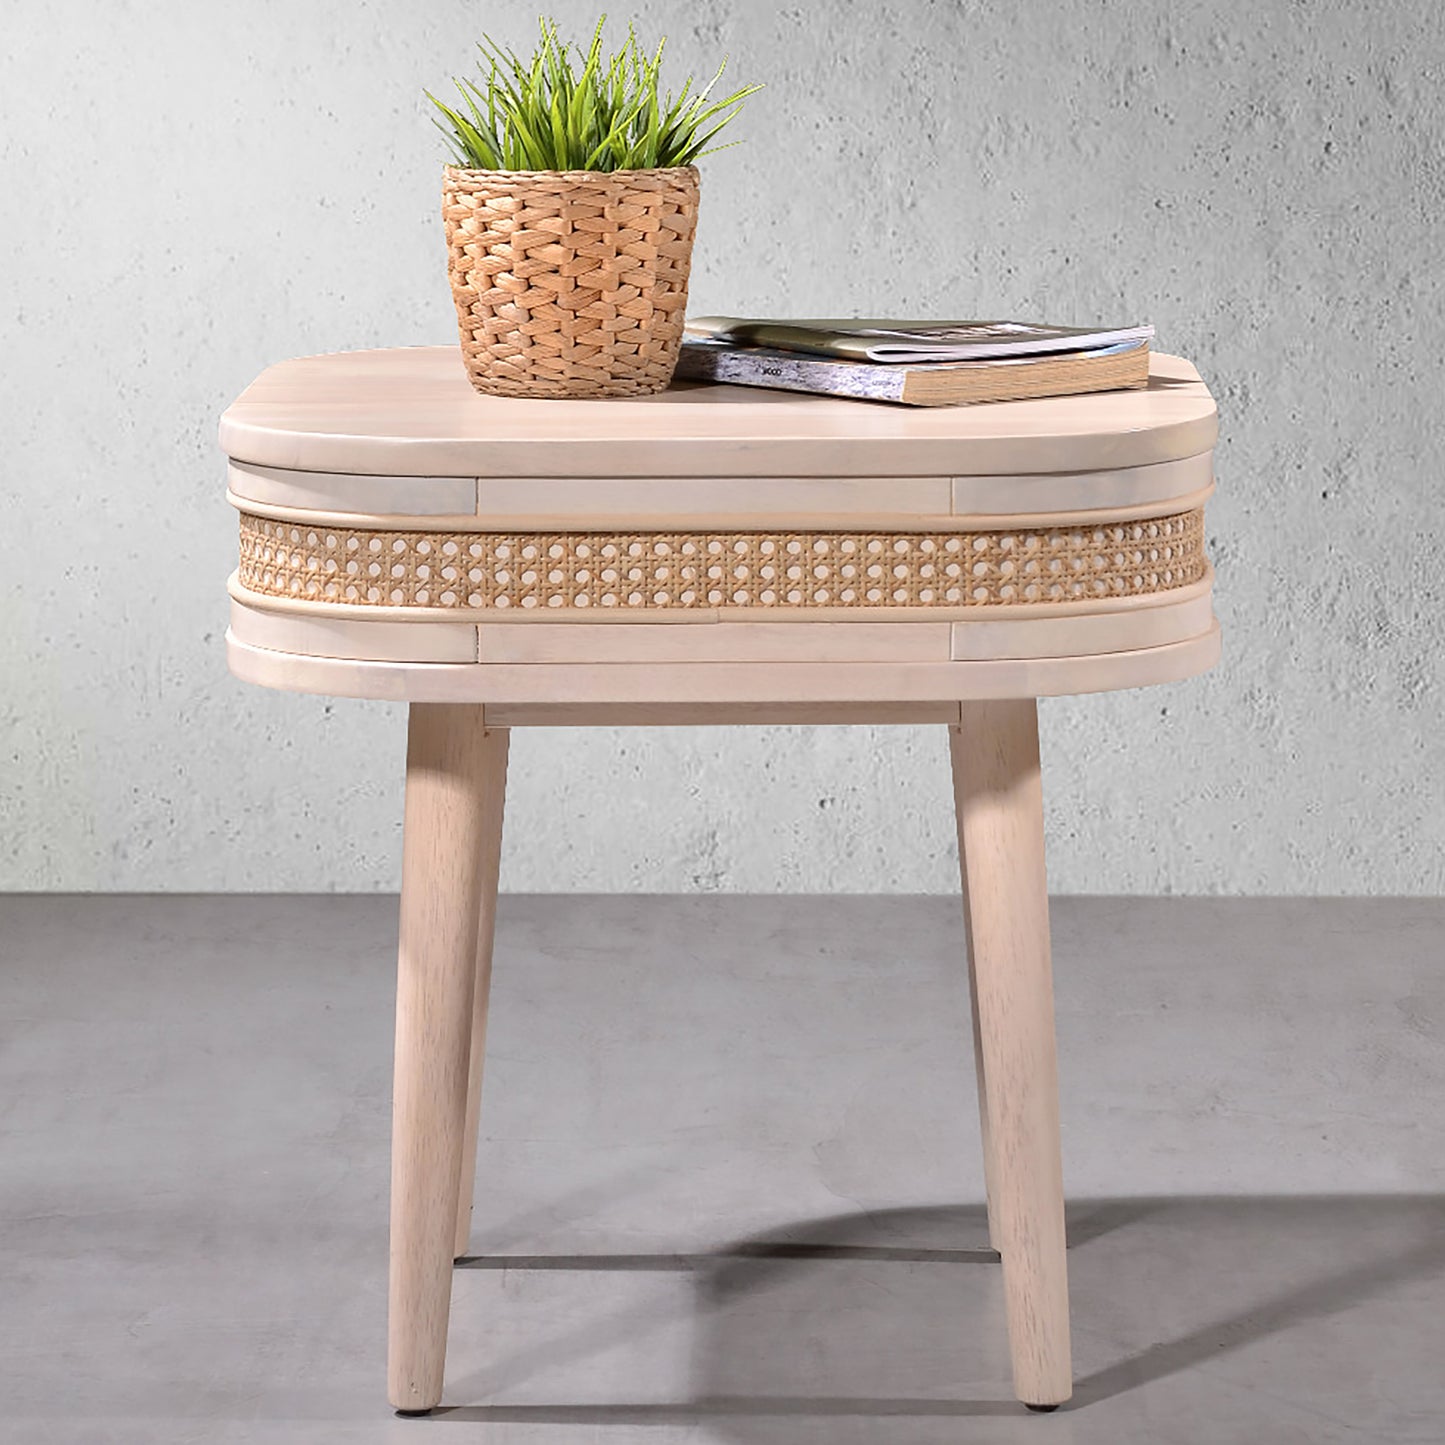 Criterion Jurien End Table 550mm Semi-Assembled, Solid Rubber Wood Construction Rattan and White Chocolate